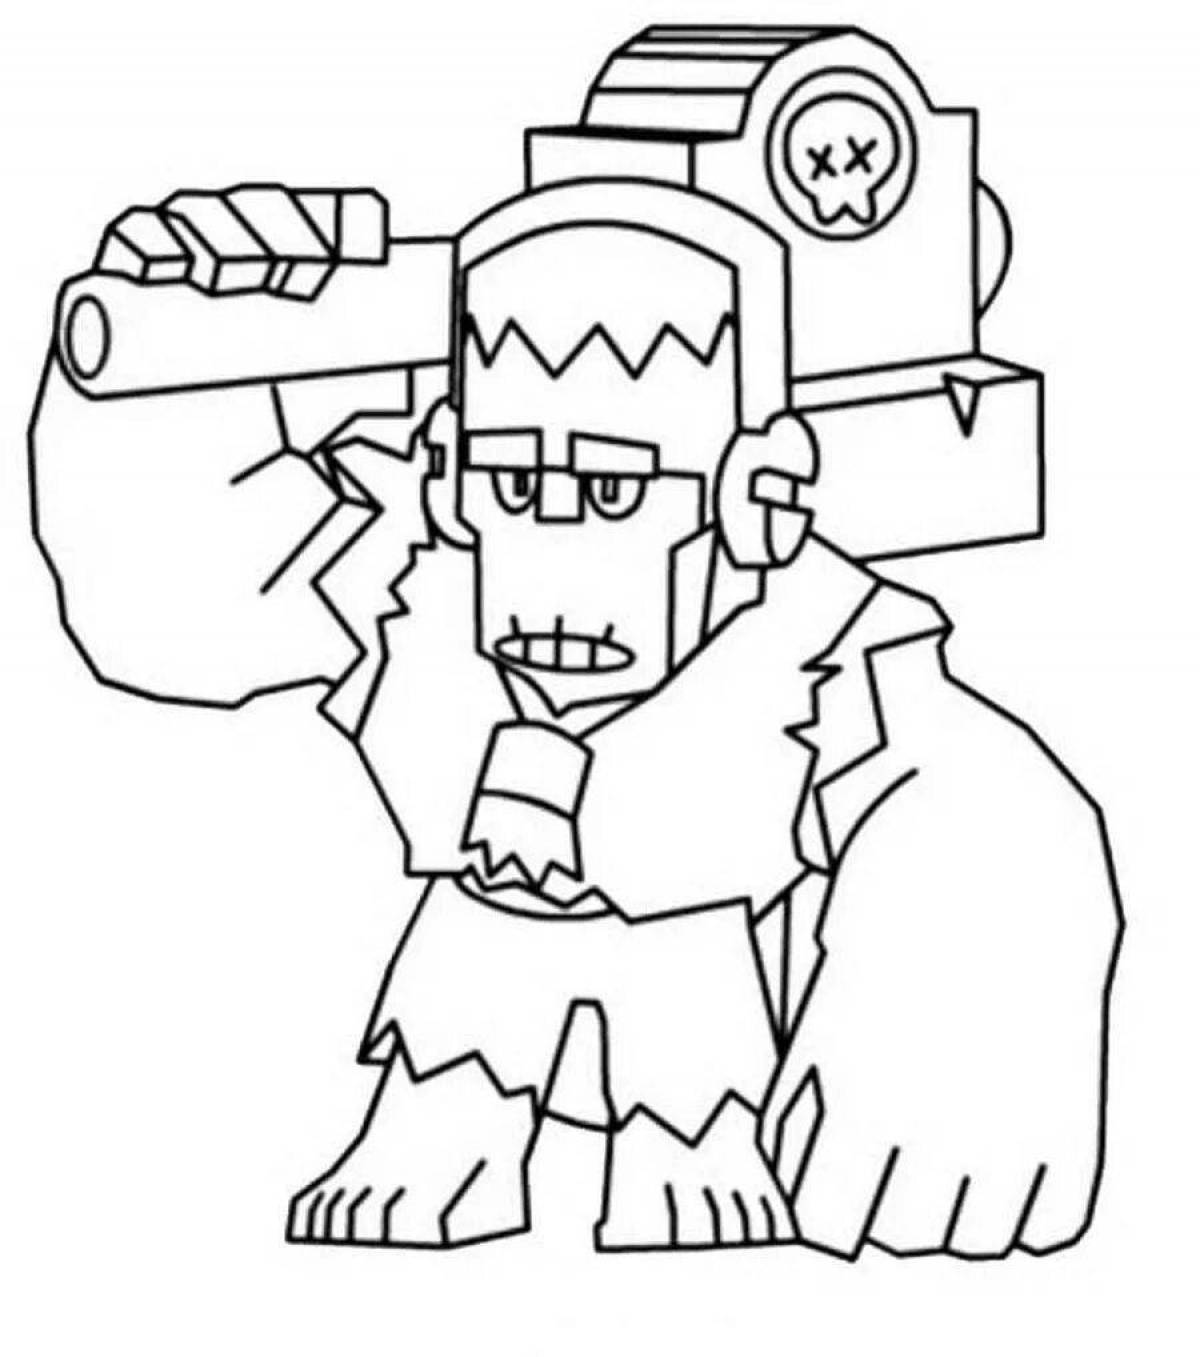 Glorious mortis coloring page